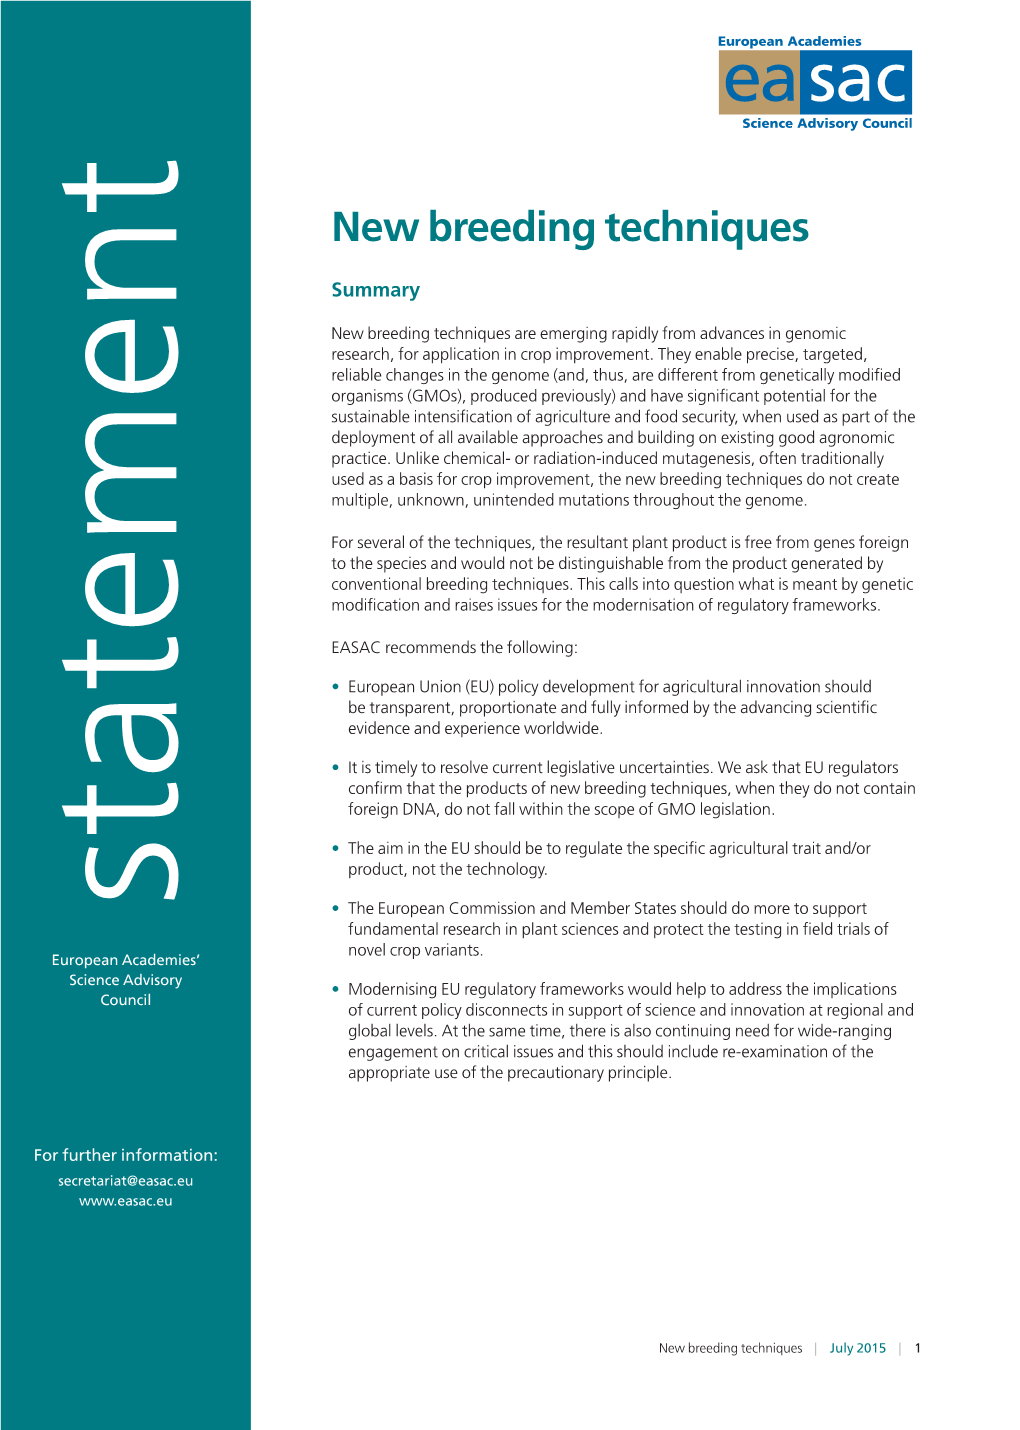 EASAC Statement on New Breeding Techniques